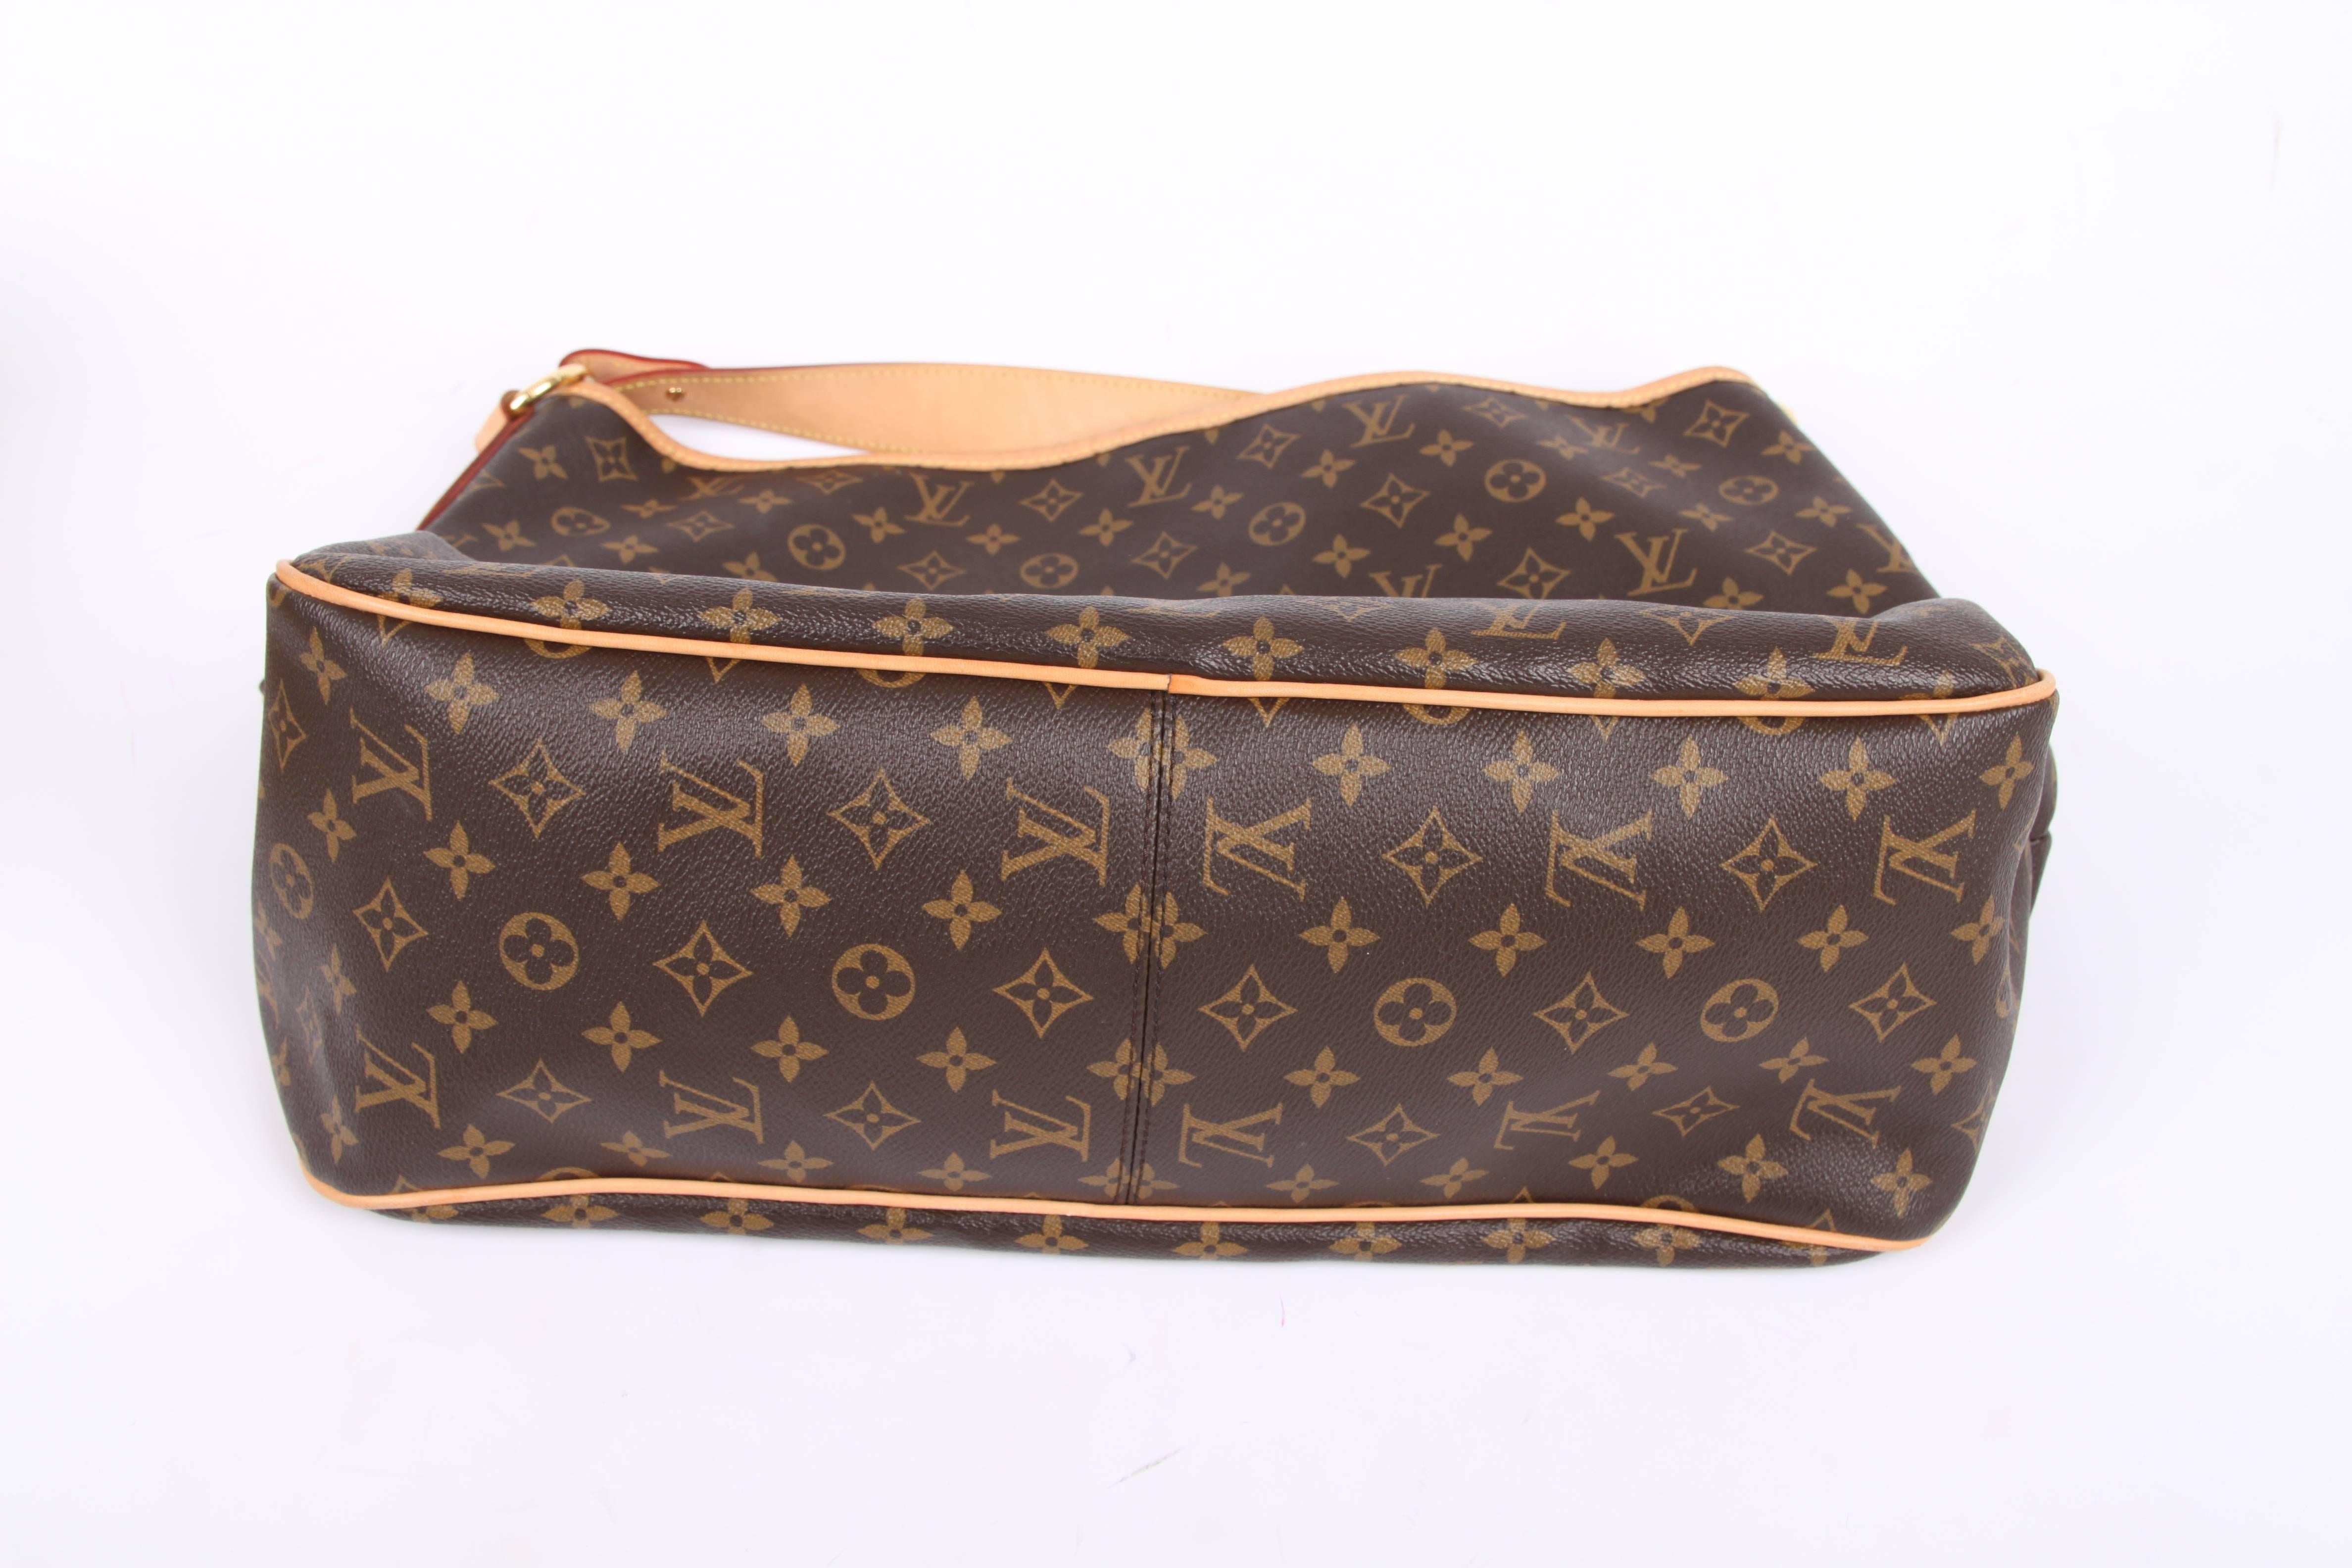 Great alternative to the Louis Vuitton Neverfull Bag, it fits just as much, and this one is called Delightful! Very pretty!

Of course crafted of dark brown canvas covered with numerous monograms, detailing in natural cowhide leather. A wide